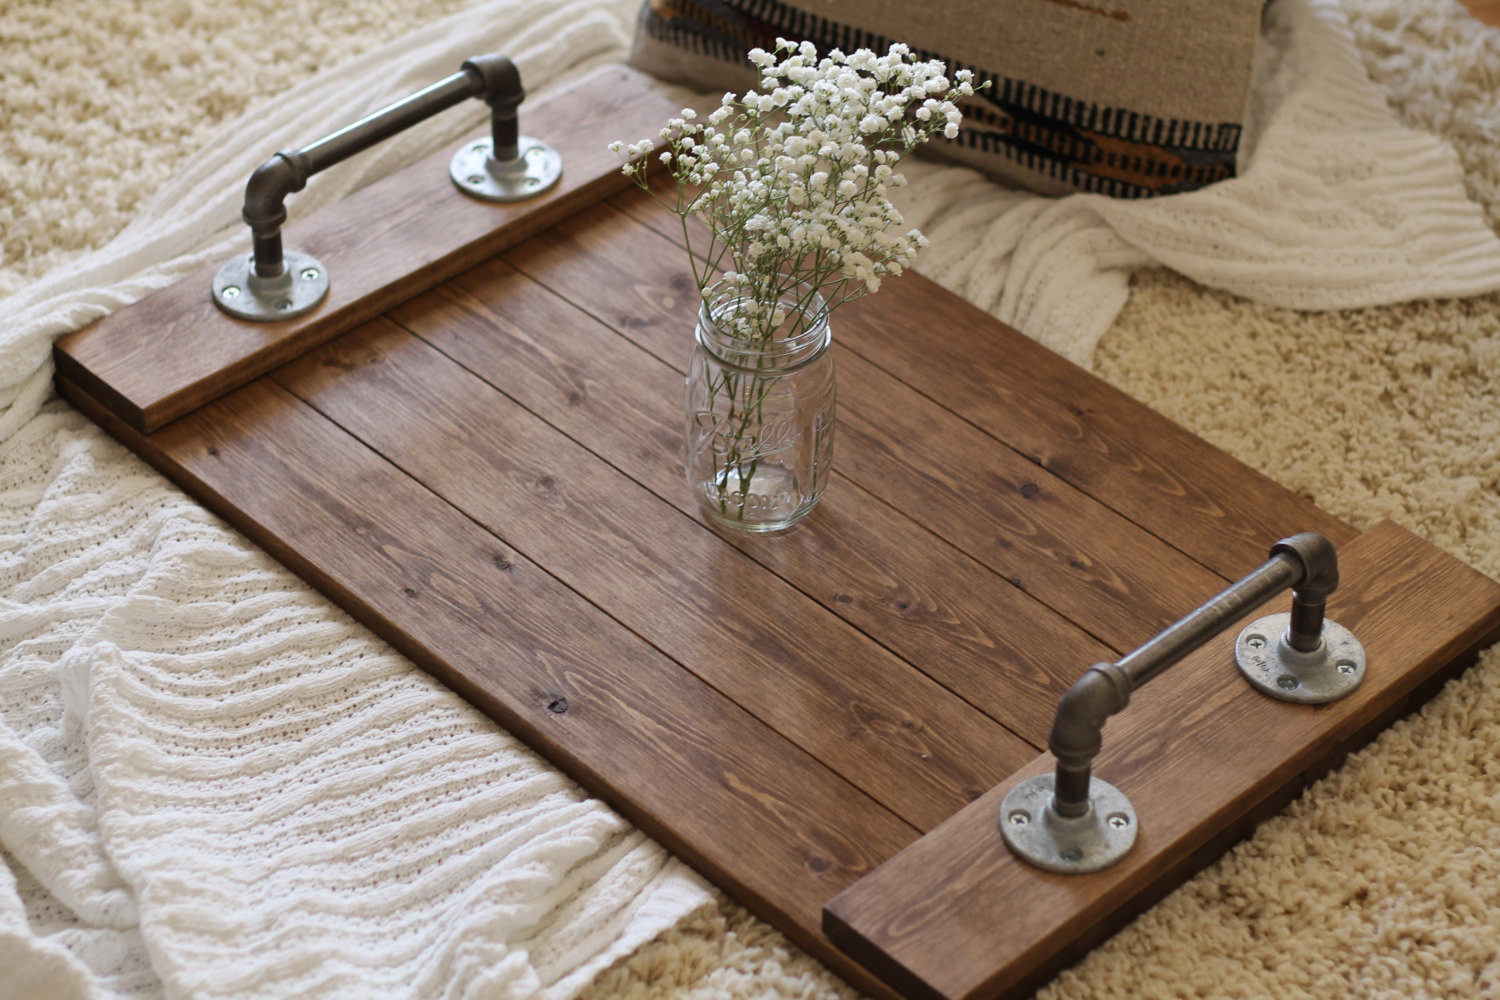 DIY Wood Serving Tray
 Rustic Industrial Tray Wooden Tray Ottoman by